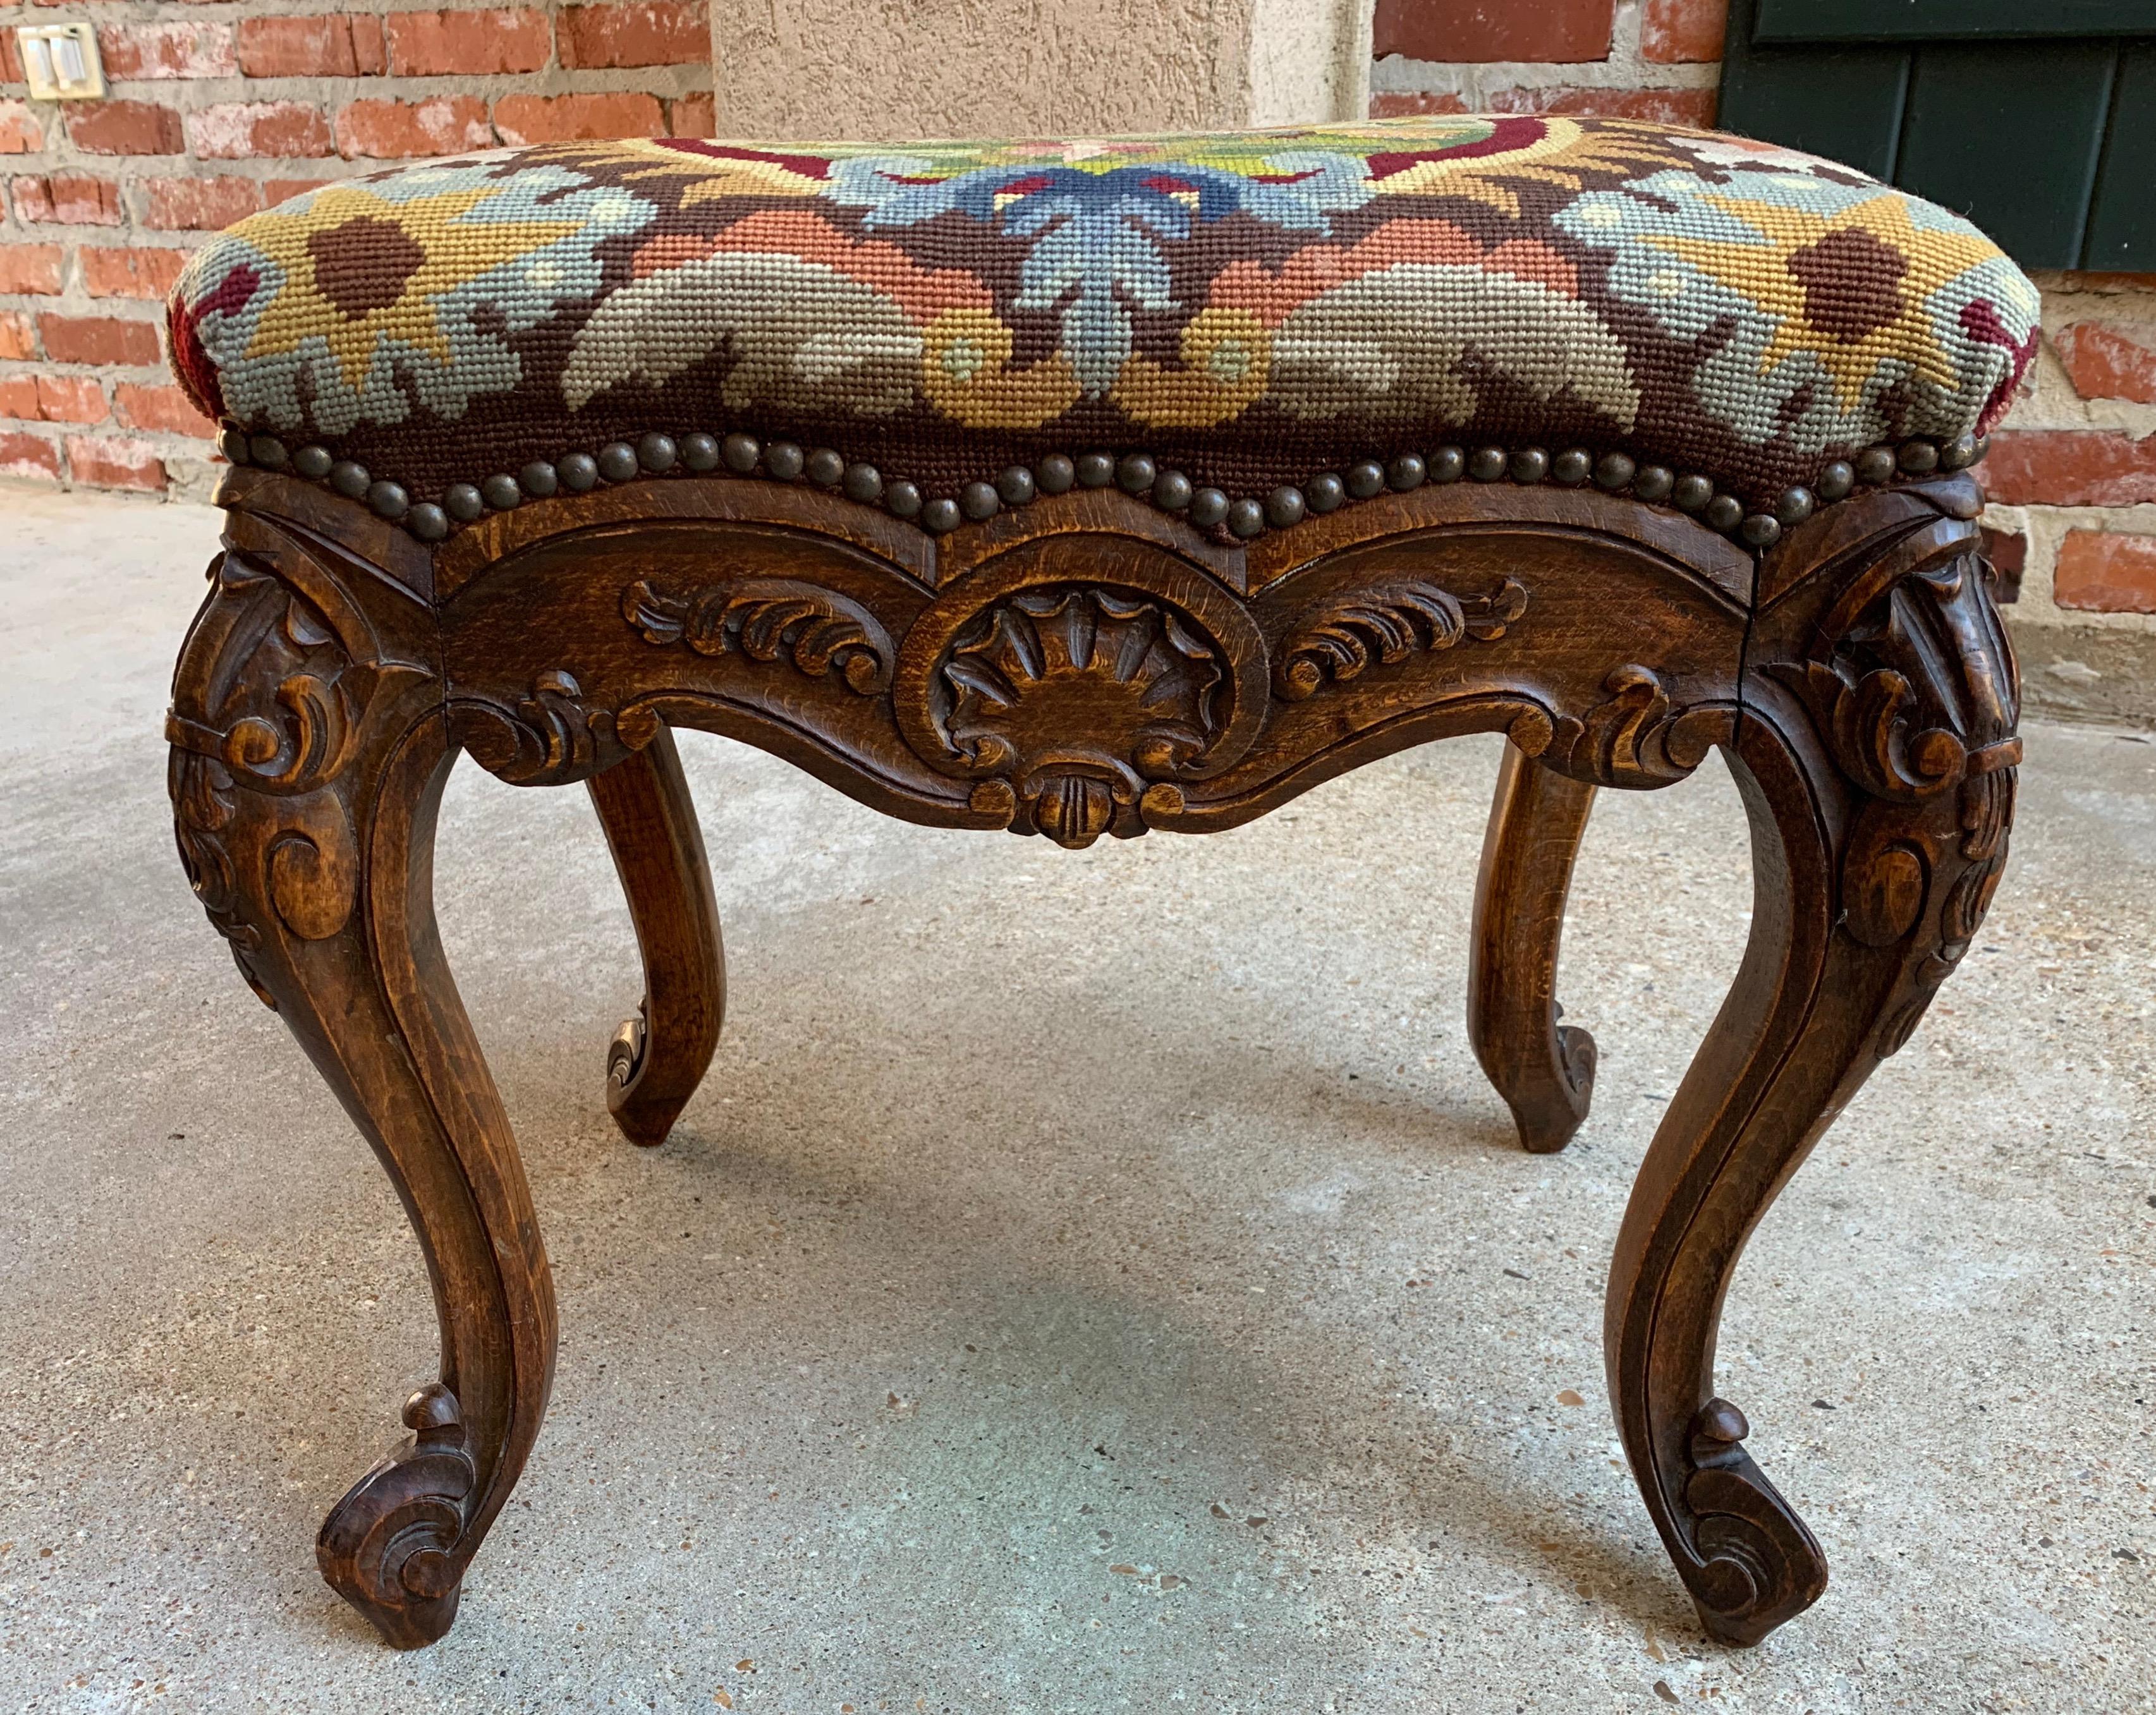 Hand-Carved 19th Century French Carved Oak Stool Bench Louis XV Style Tabouret Needlepoint